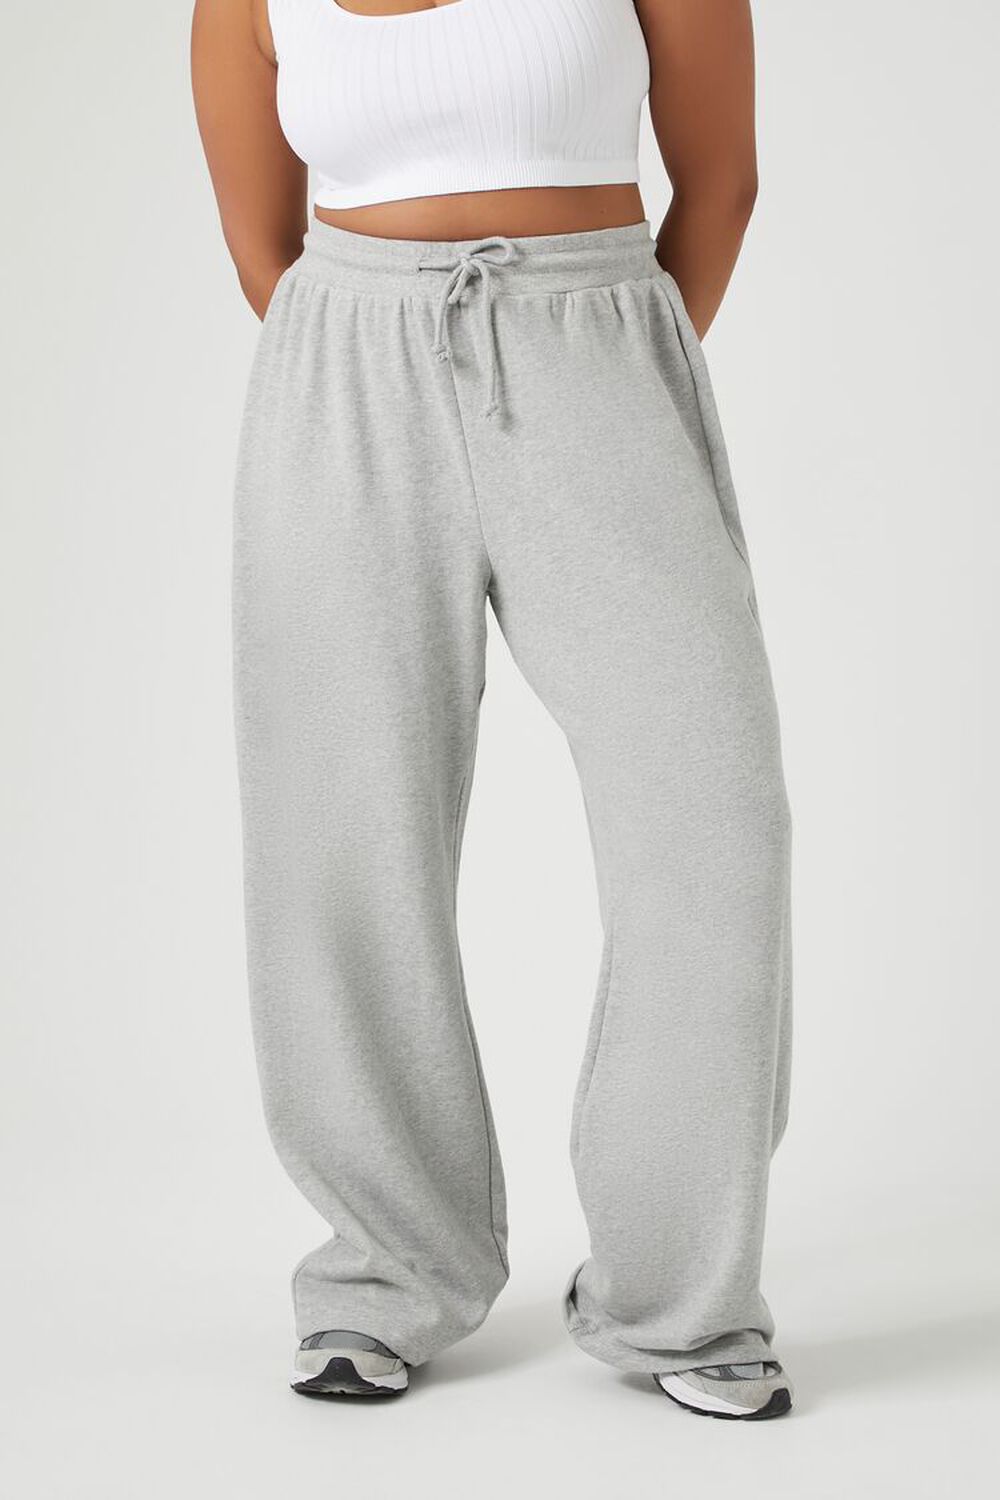 Small O H I O Circle Women's Long Weekend Burnout French Terry Sweatpants